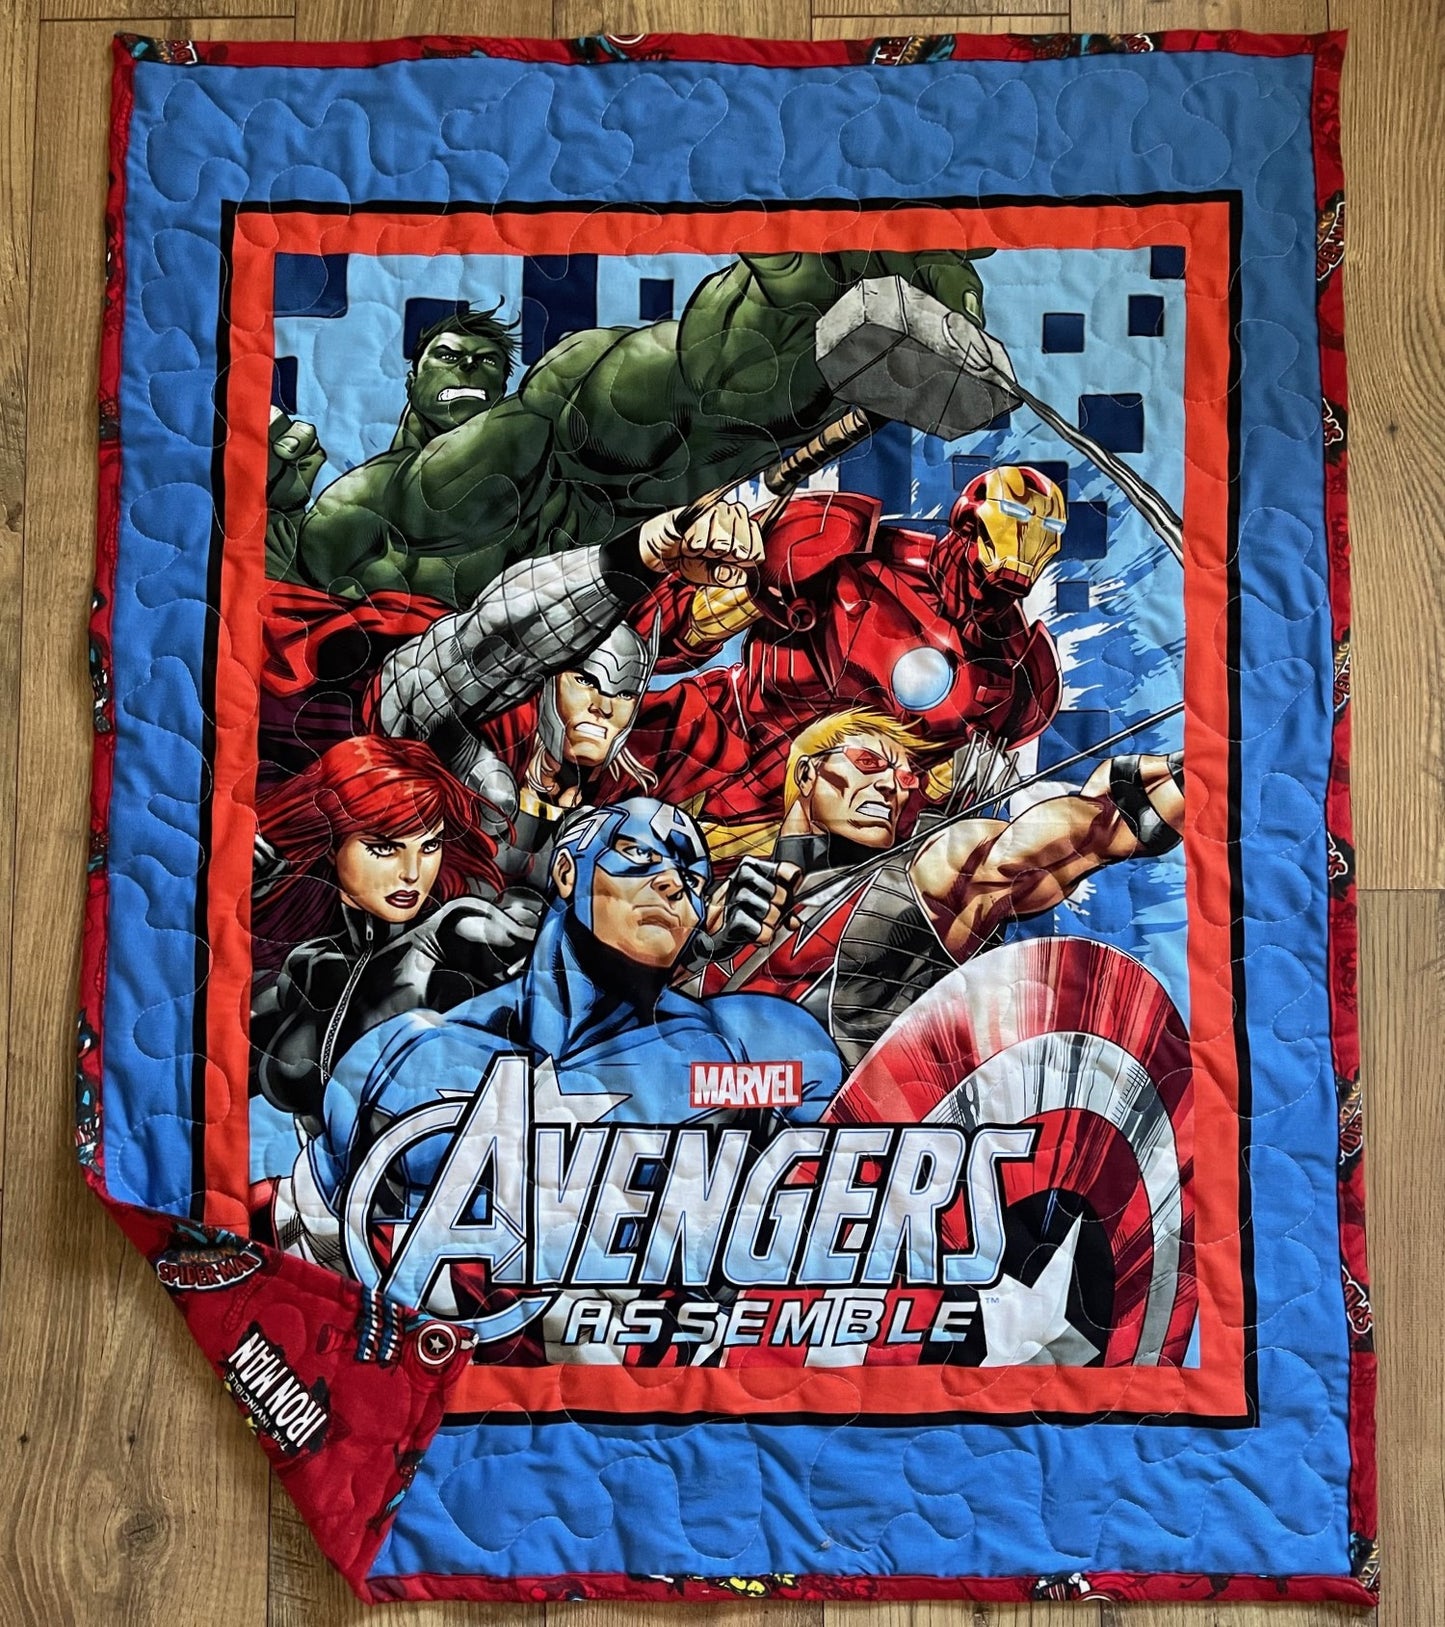 MARVEL SUPERHEROES AVENGERS ASSEMBLE BLACK WIDOW, HAWKEYE, THOR, THE HULK, IRON MAN, CAPTAIN AMERICA Inspired Quilted Blanket Soft Flannel Backing